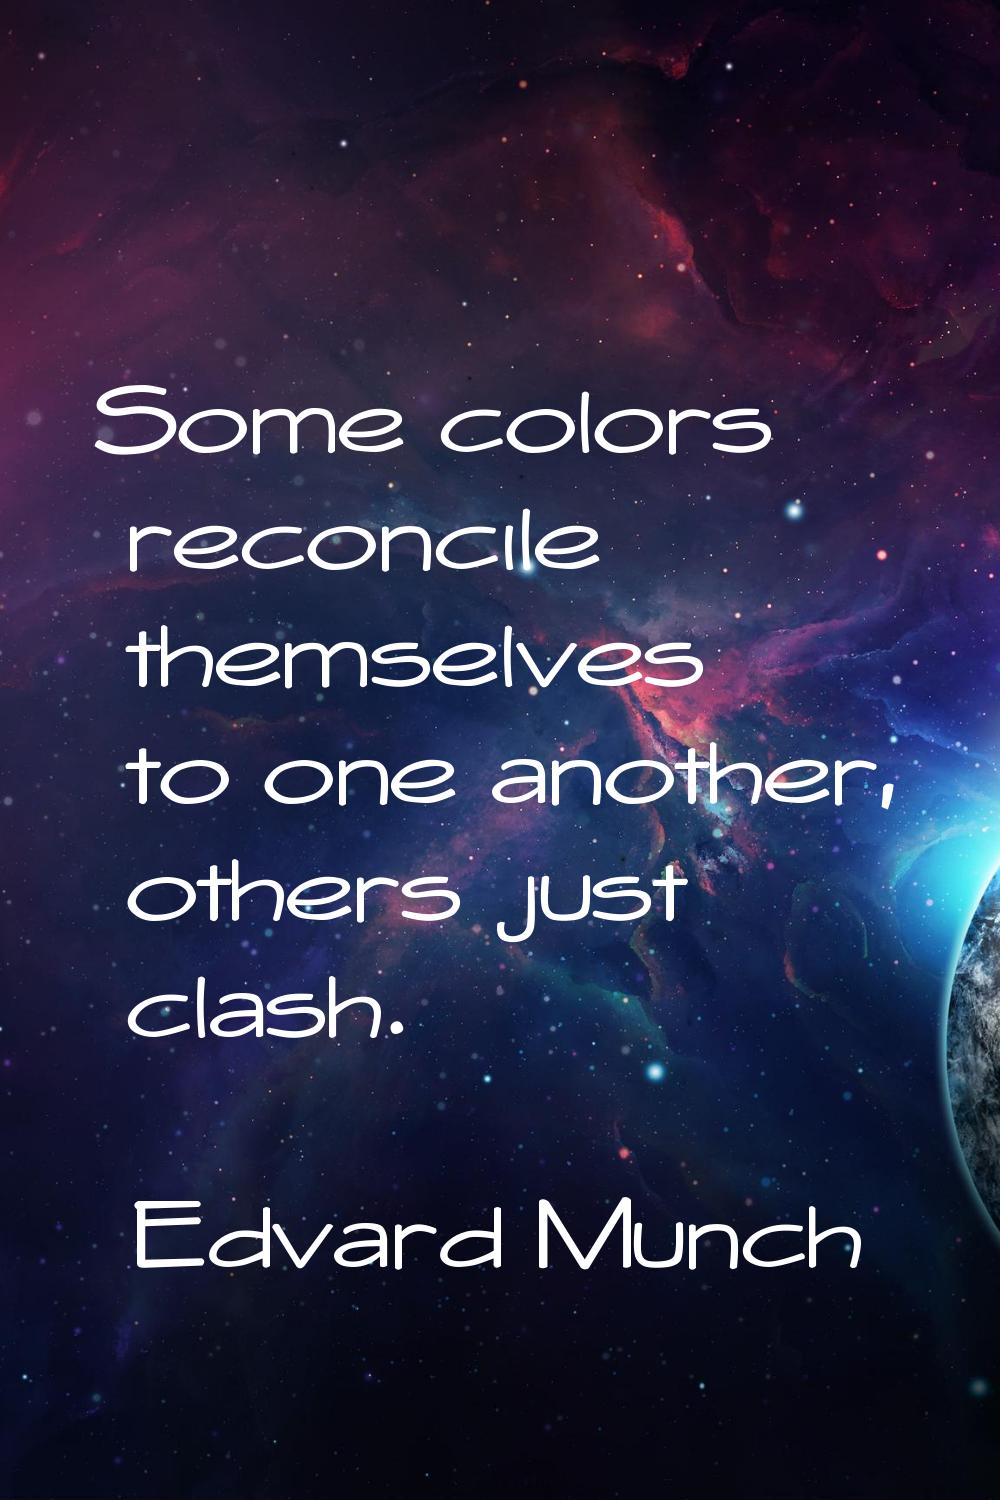 Some colors reconcile themselves to one another, others just clash.